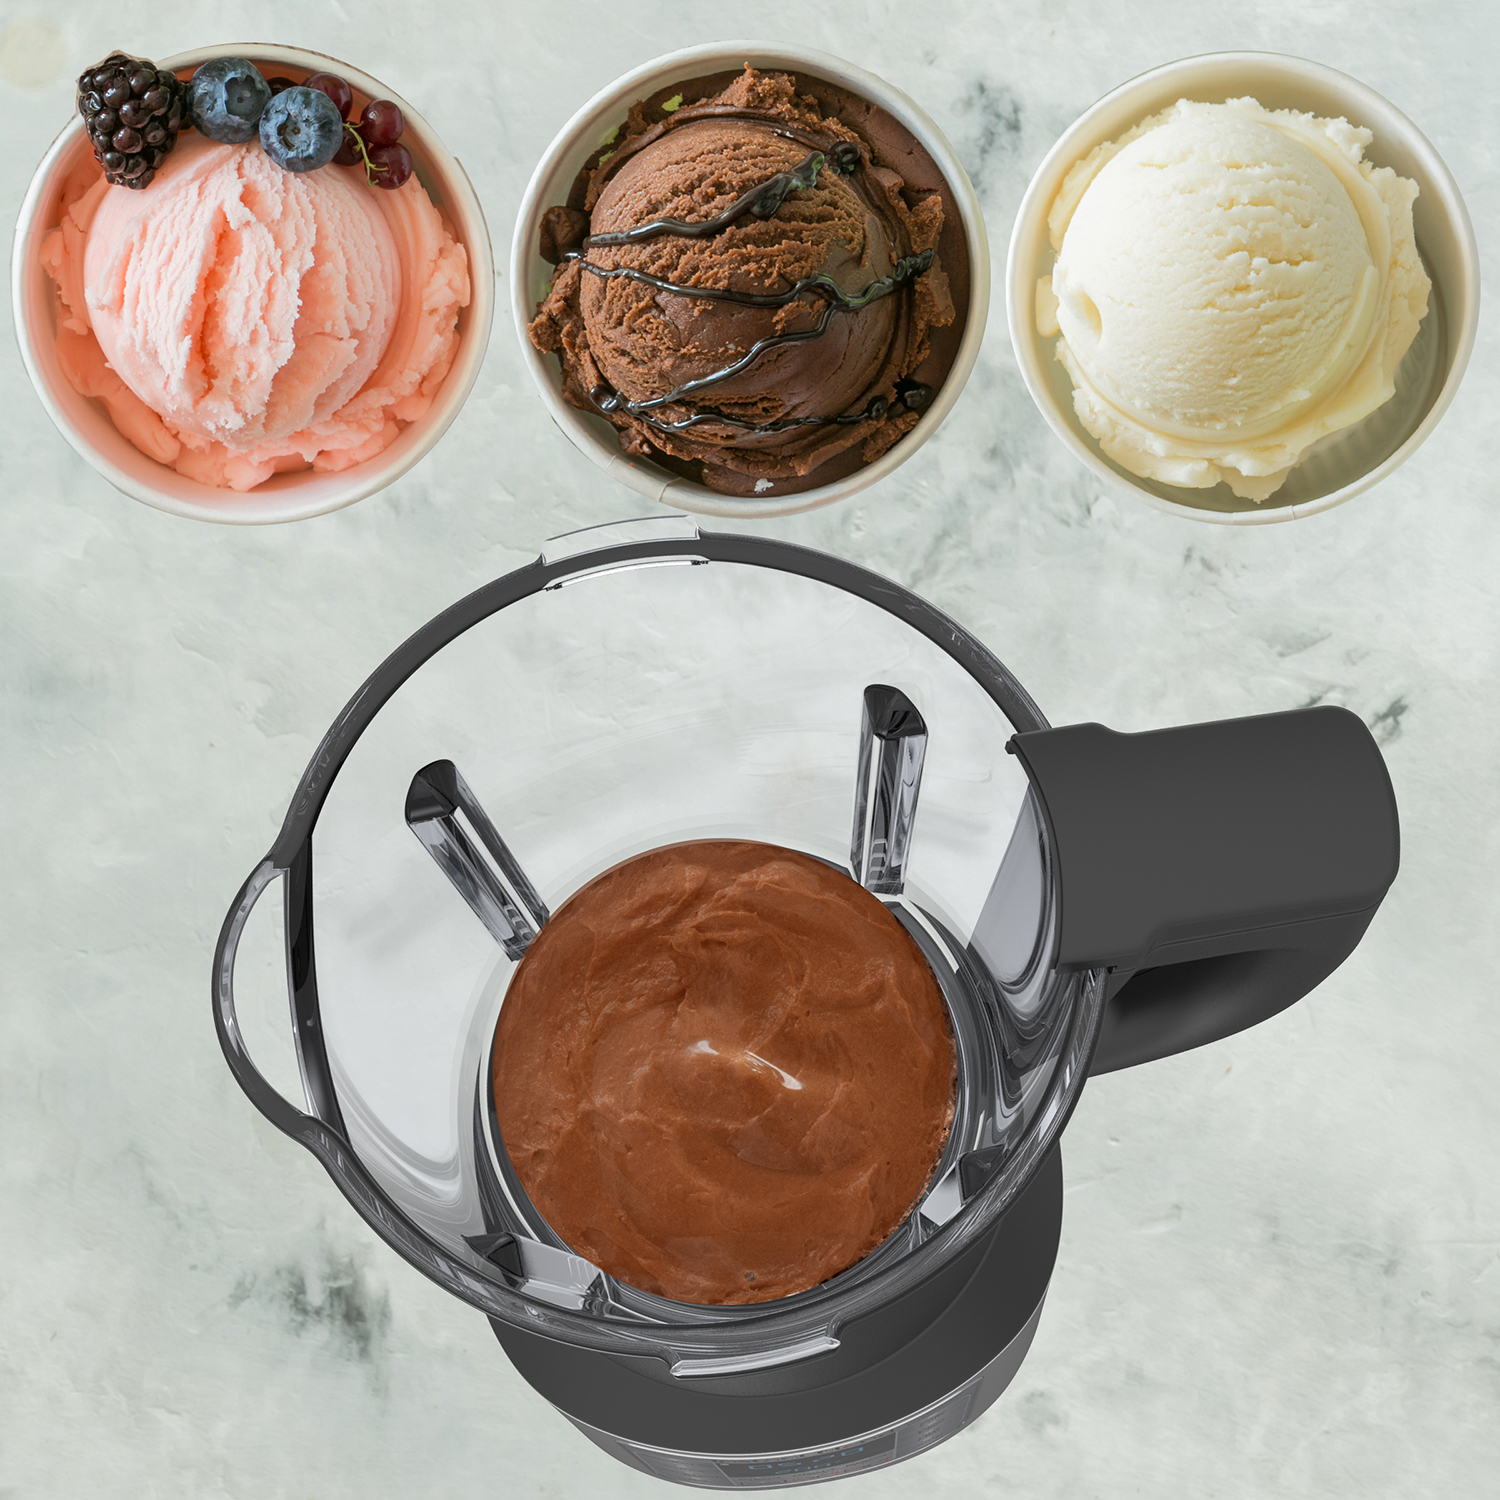 instant pot cooking blender is available exclusively at walmart – here, ice cream scoops in bowls next to the blender